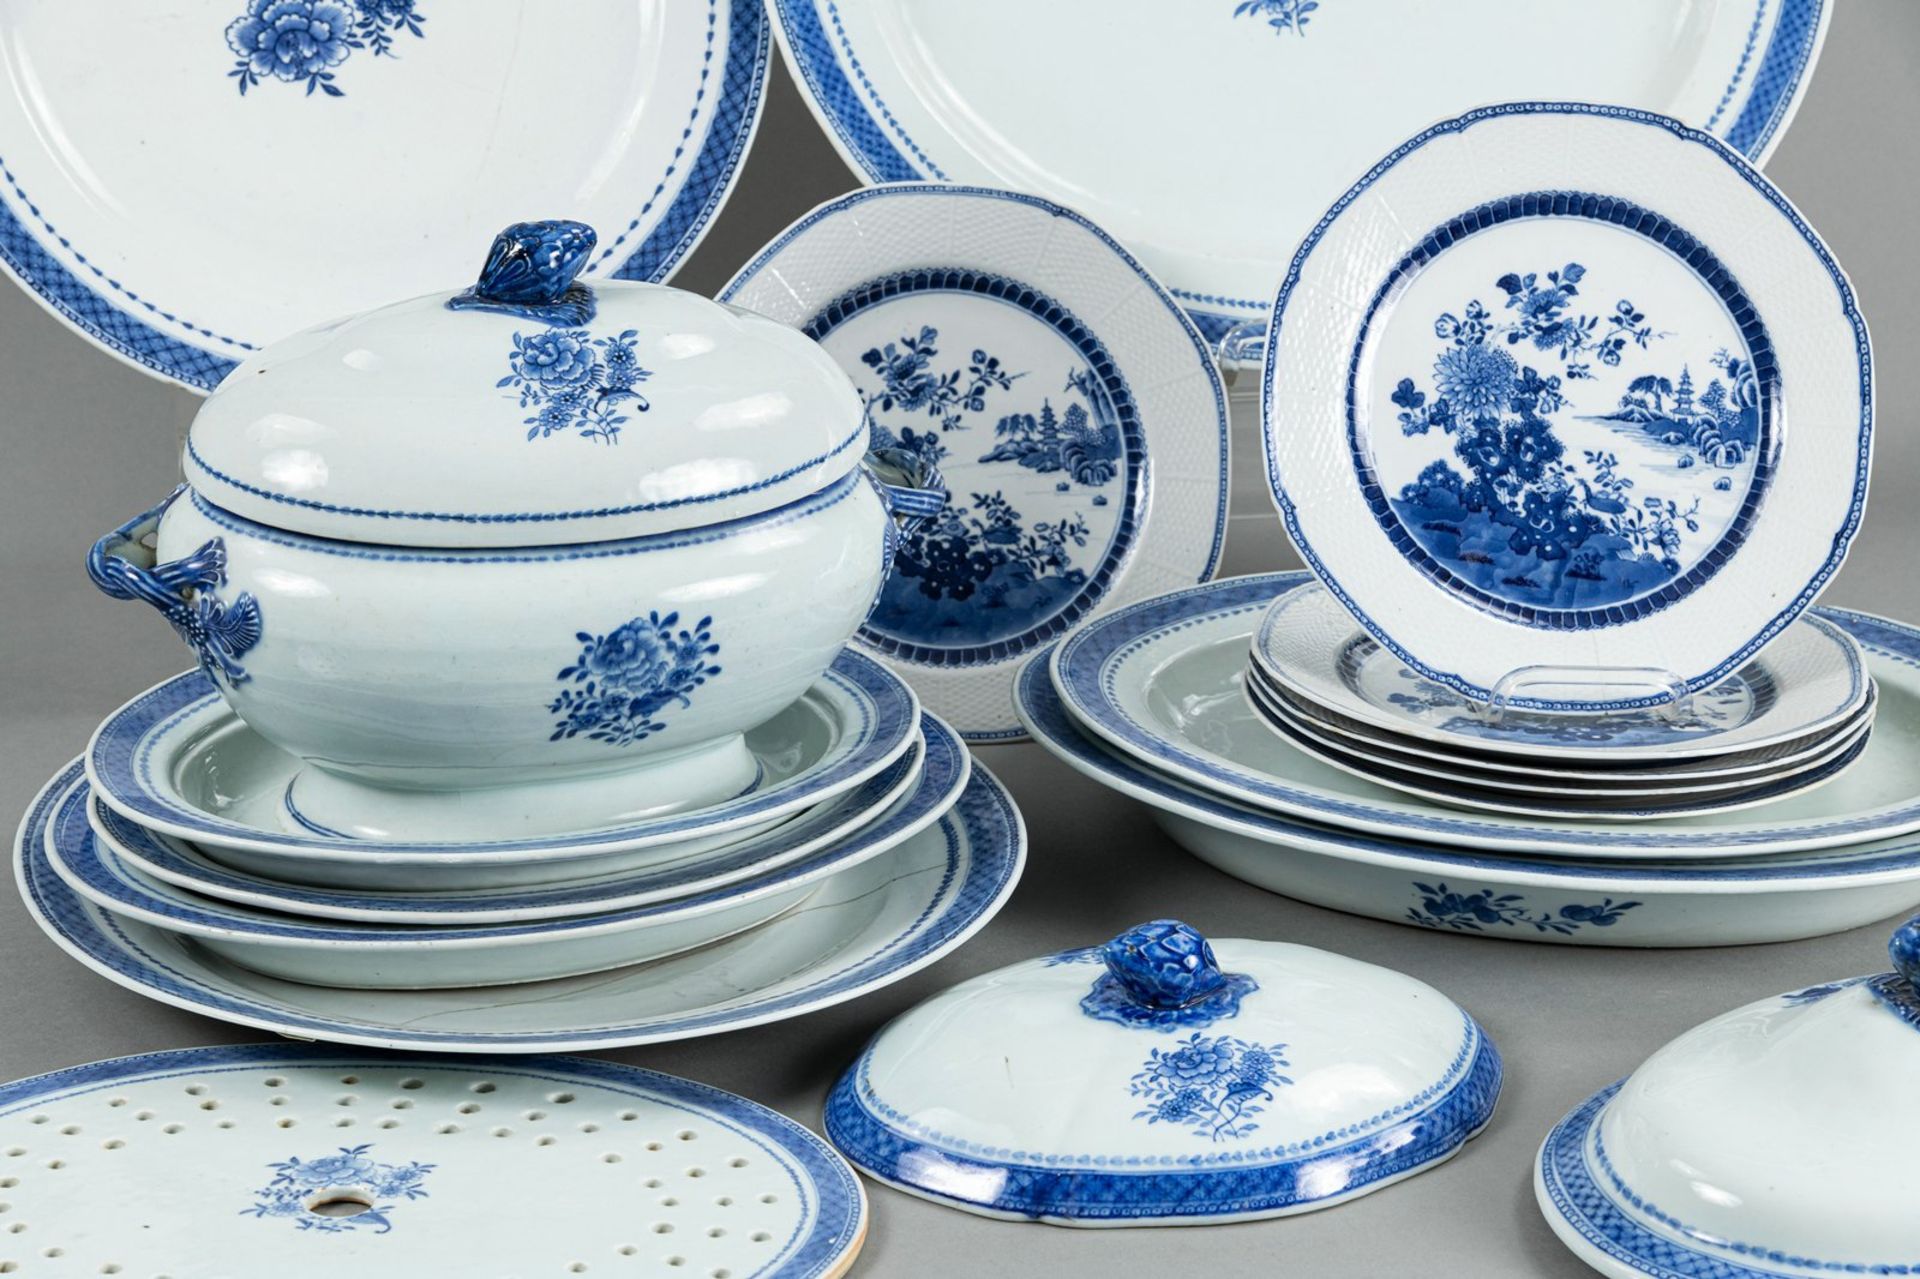 A 19-PIECE DINNERWARE SET WITH A TUREEN, TWO COVERS, WARMING PLATES AND DISHES - Image 8 of 8